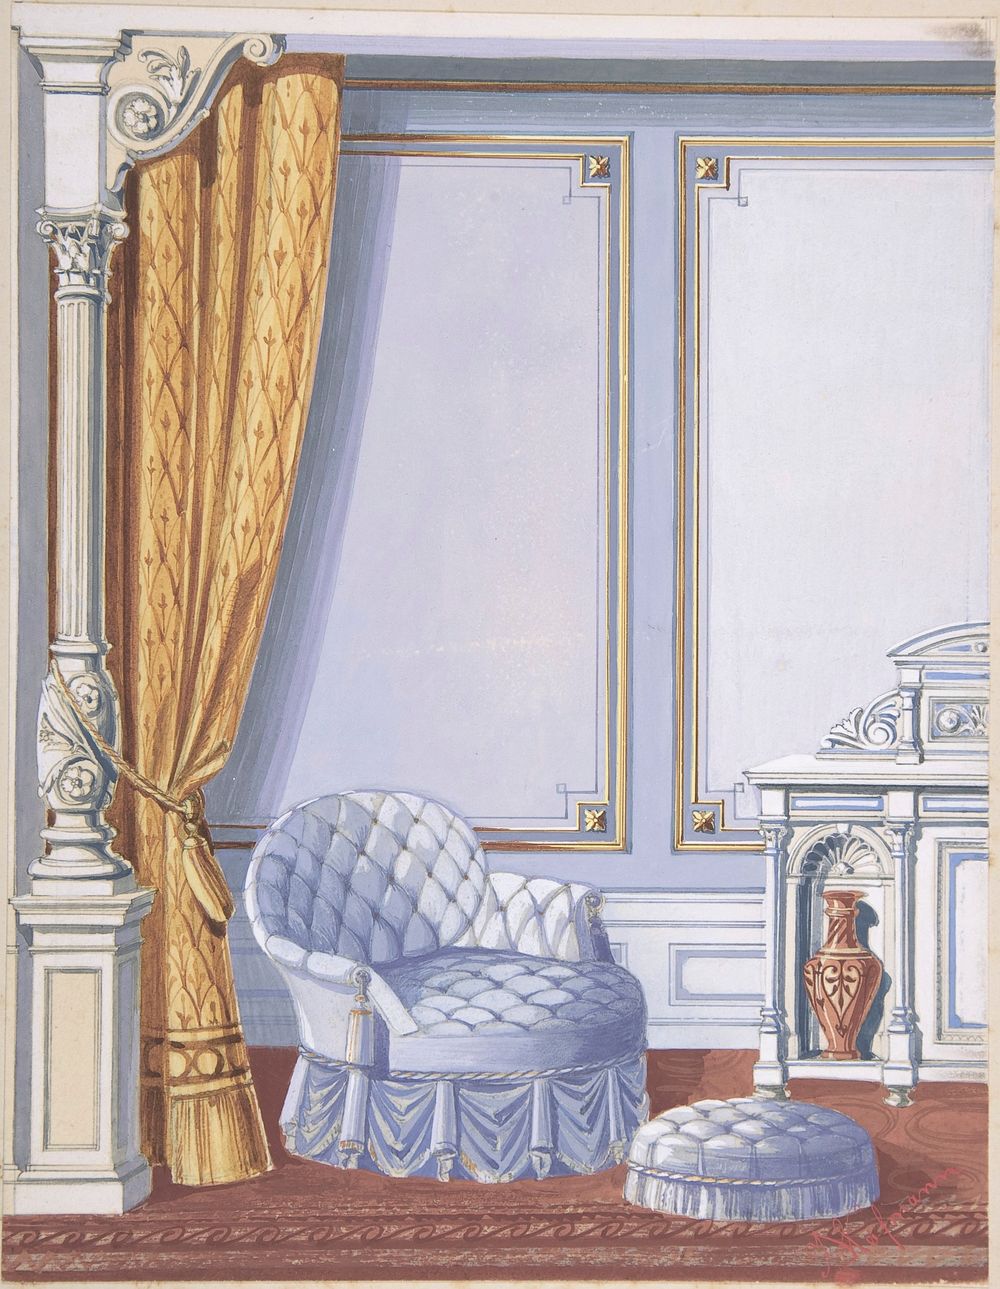 Interior Design for a Gray Curtained Alcove, with an Uphostered Armchair, Ottoman and Cabinet